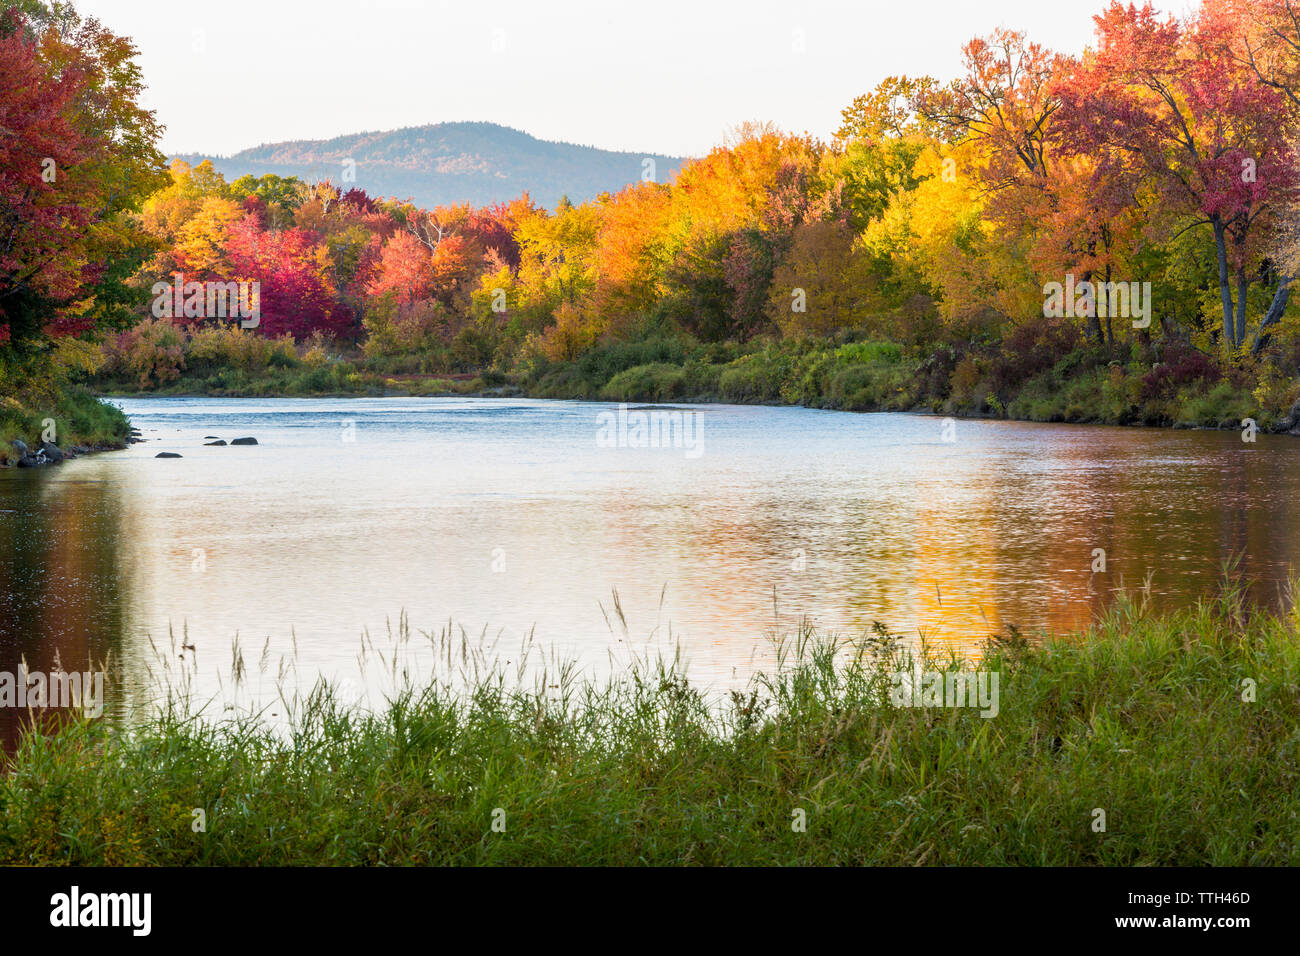 Fall colors line the banks of the East Branch of the Penobscot River. Stock Photo